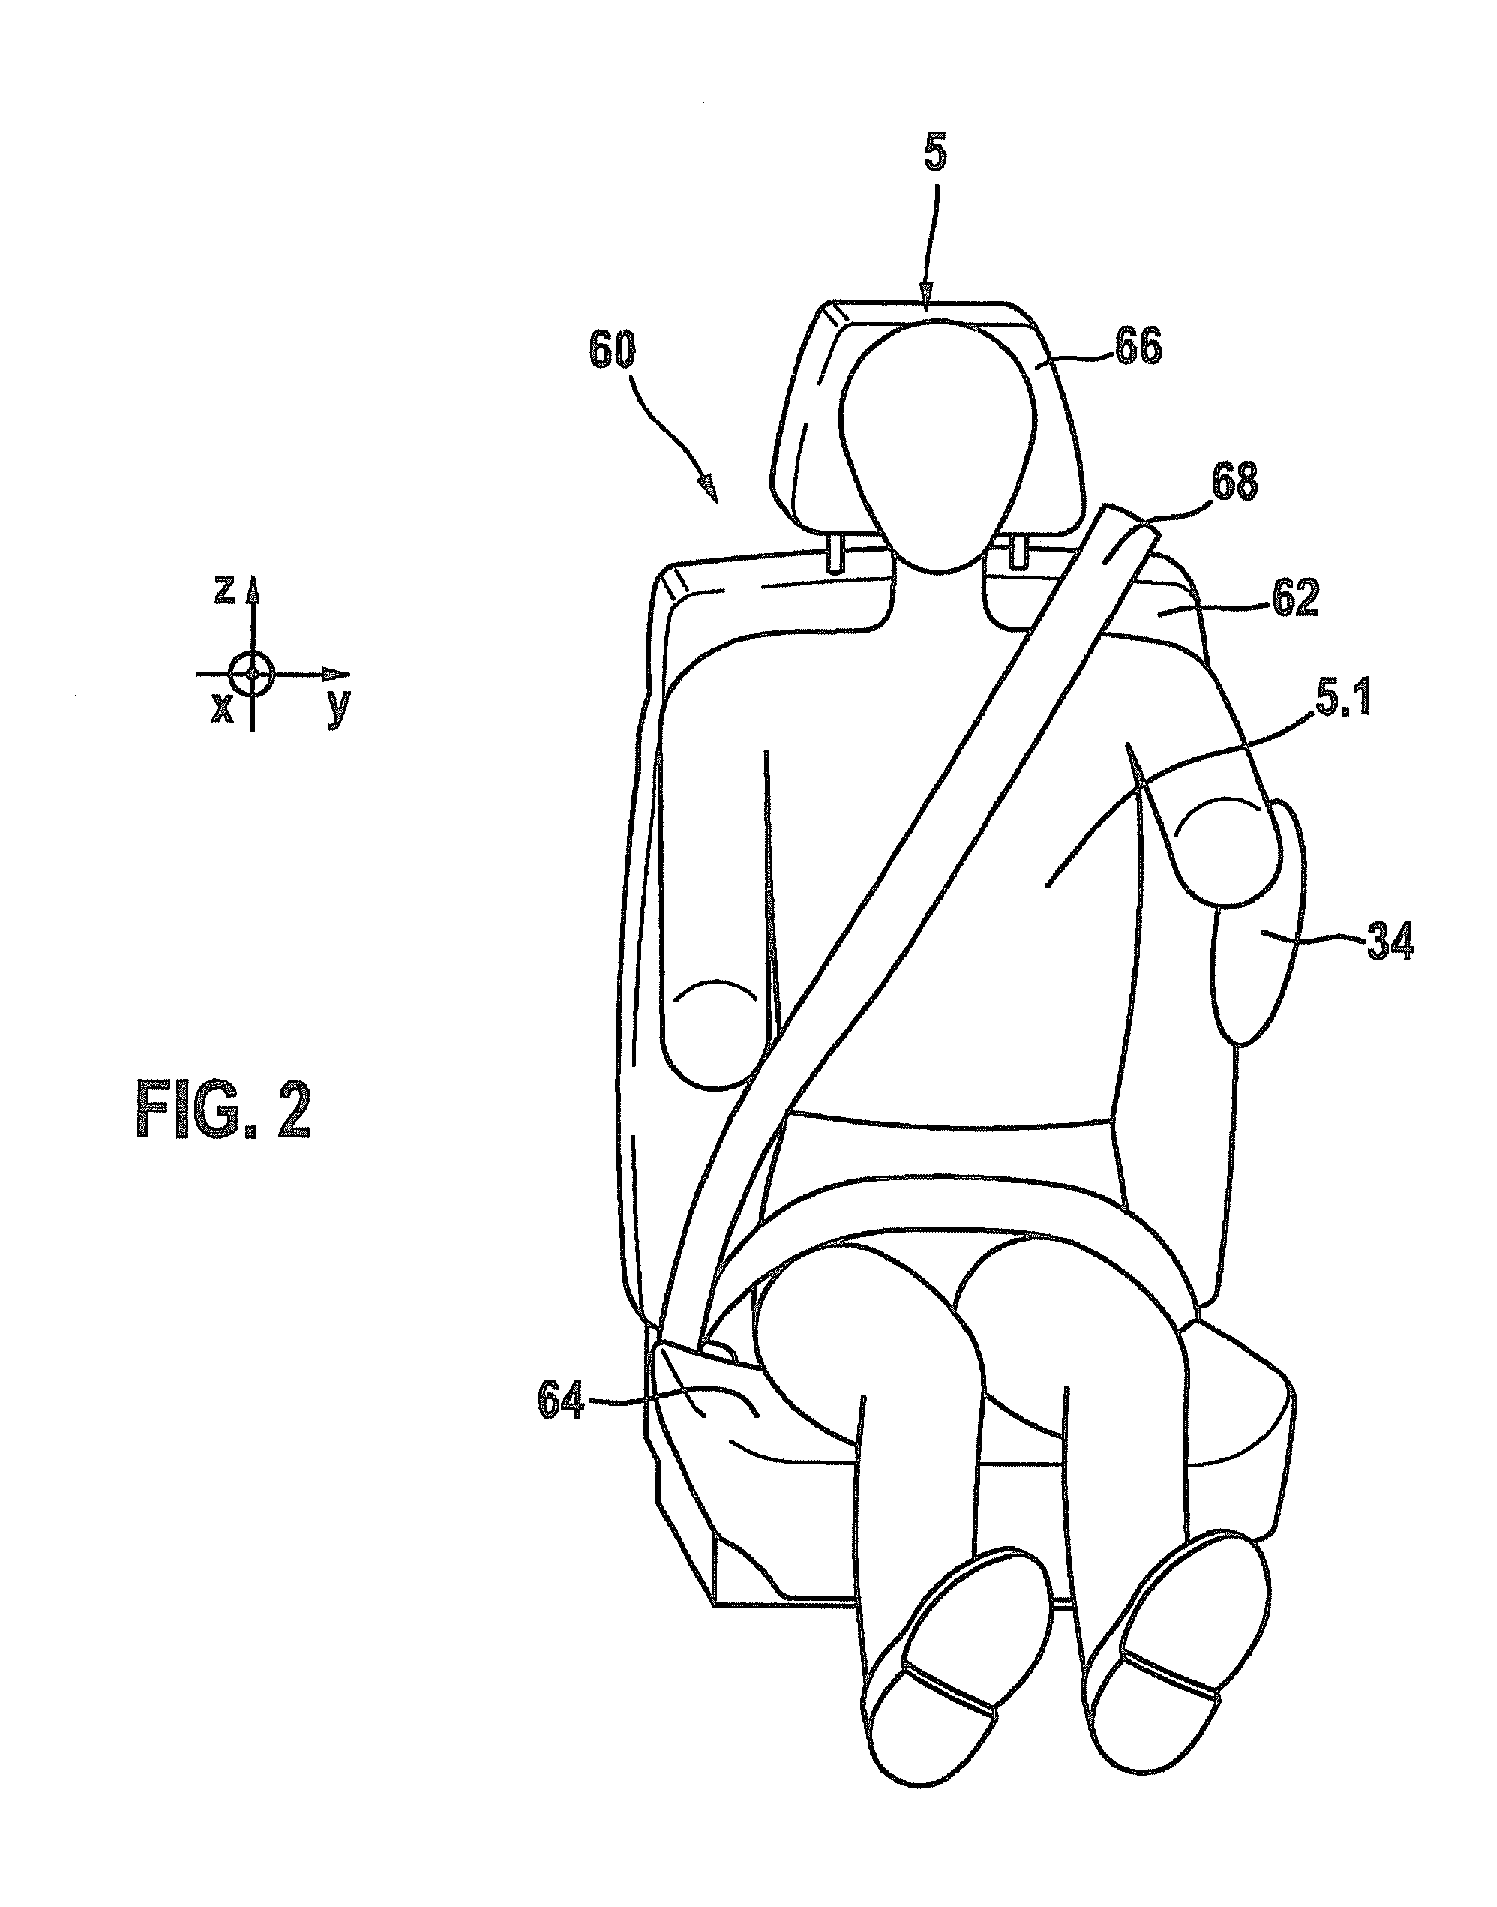 Method and device for protecting and restraining a passenger and an evaluation and control unit for a protection and restraint device